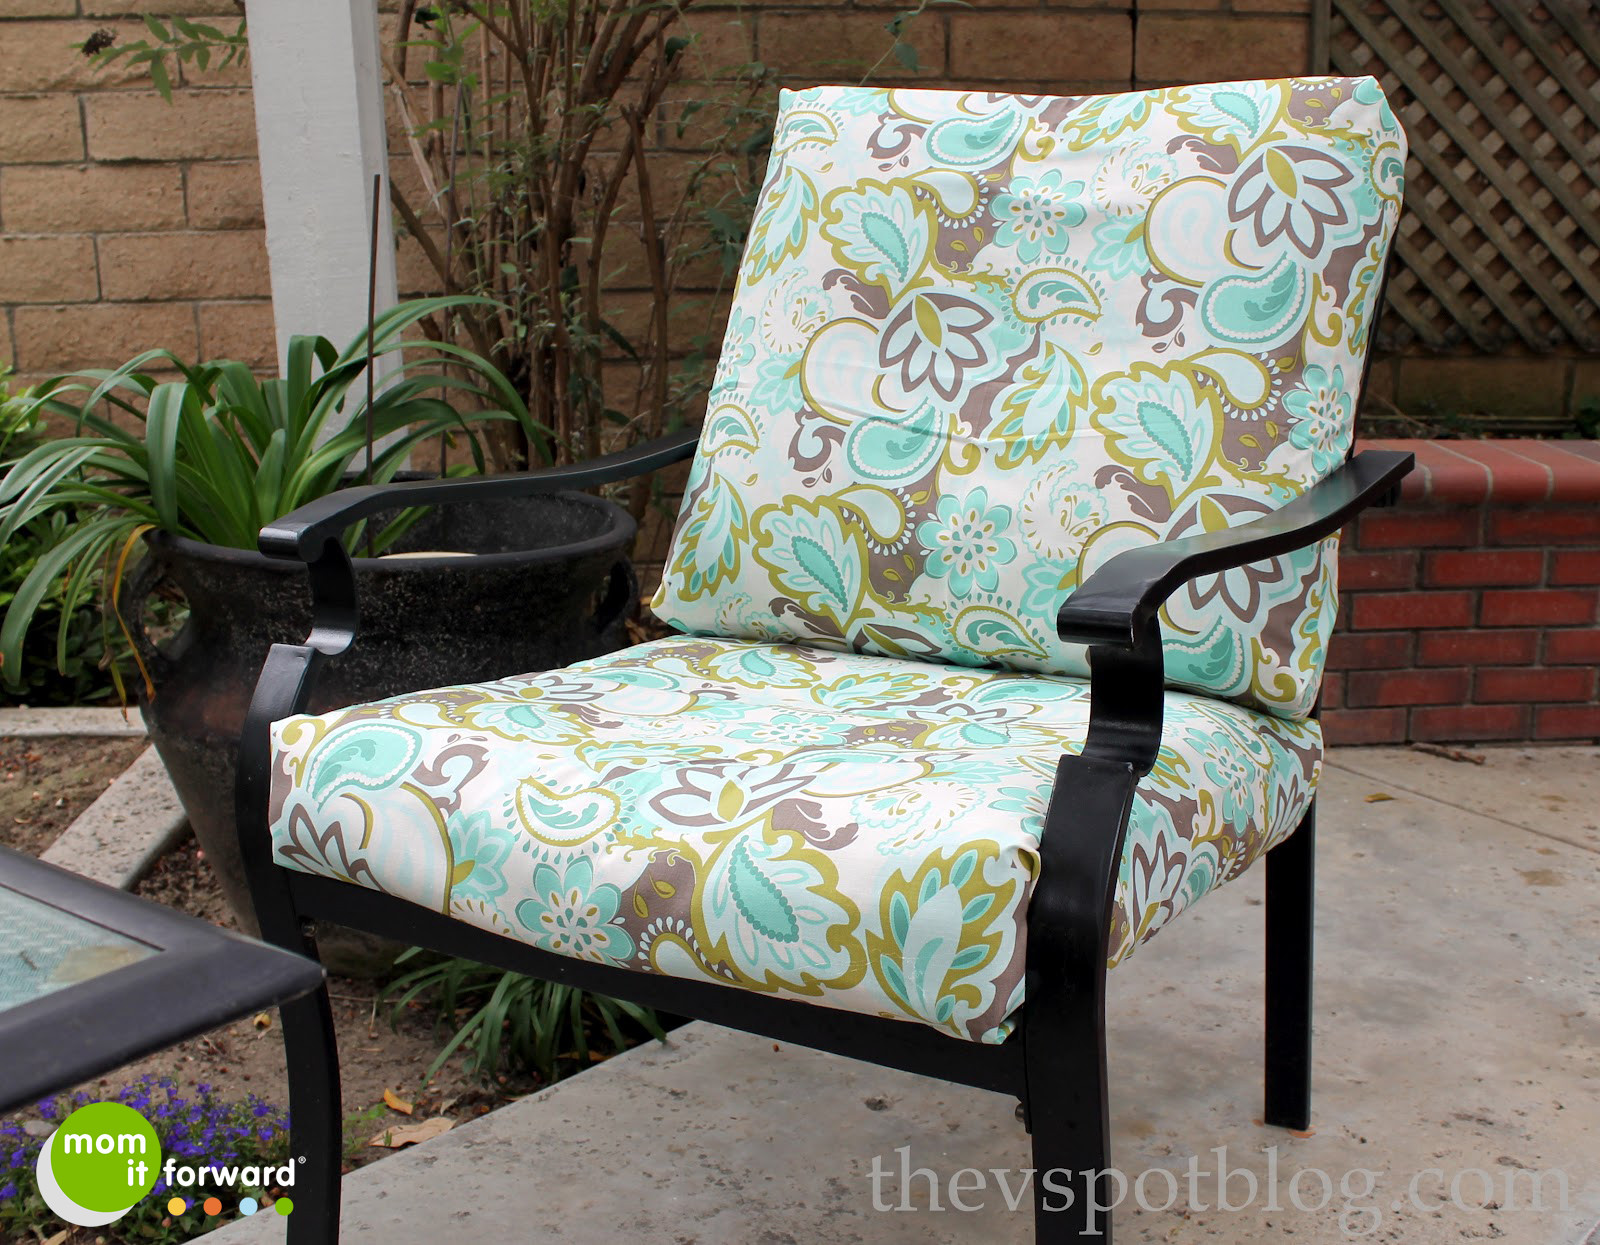 DIY Outdoor Seat Cushions
 DIY How to Recover Outdoor Furniture With a Glue Gun